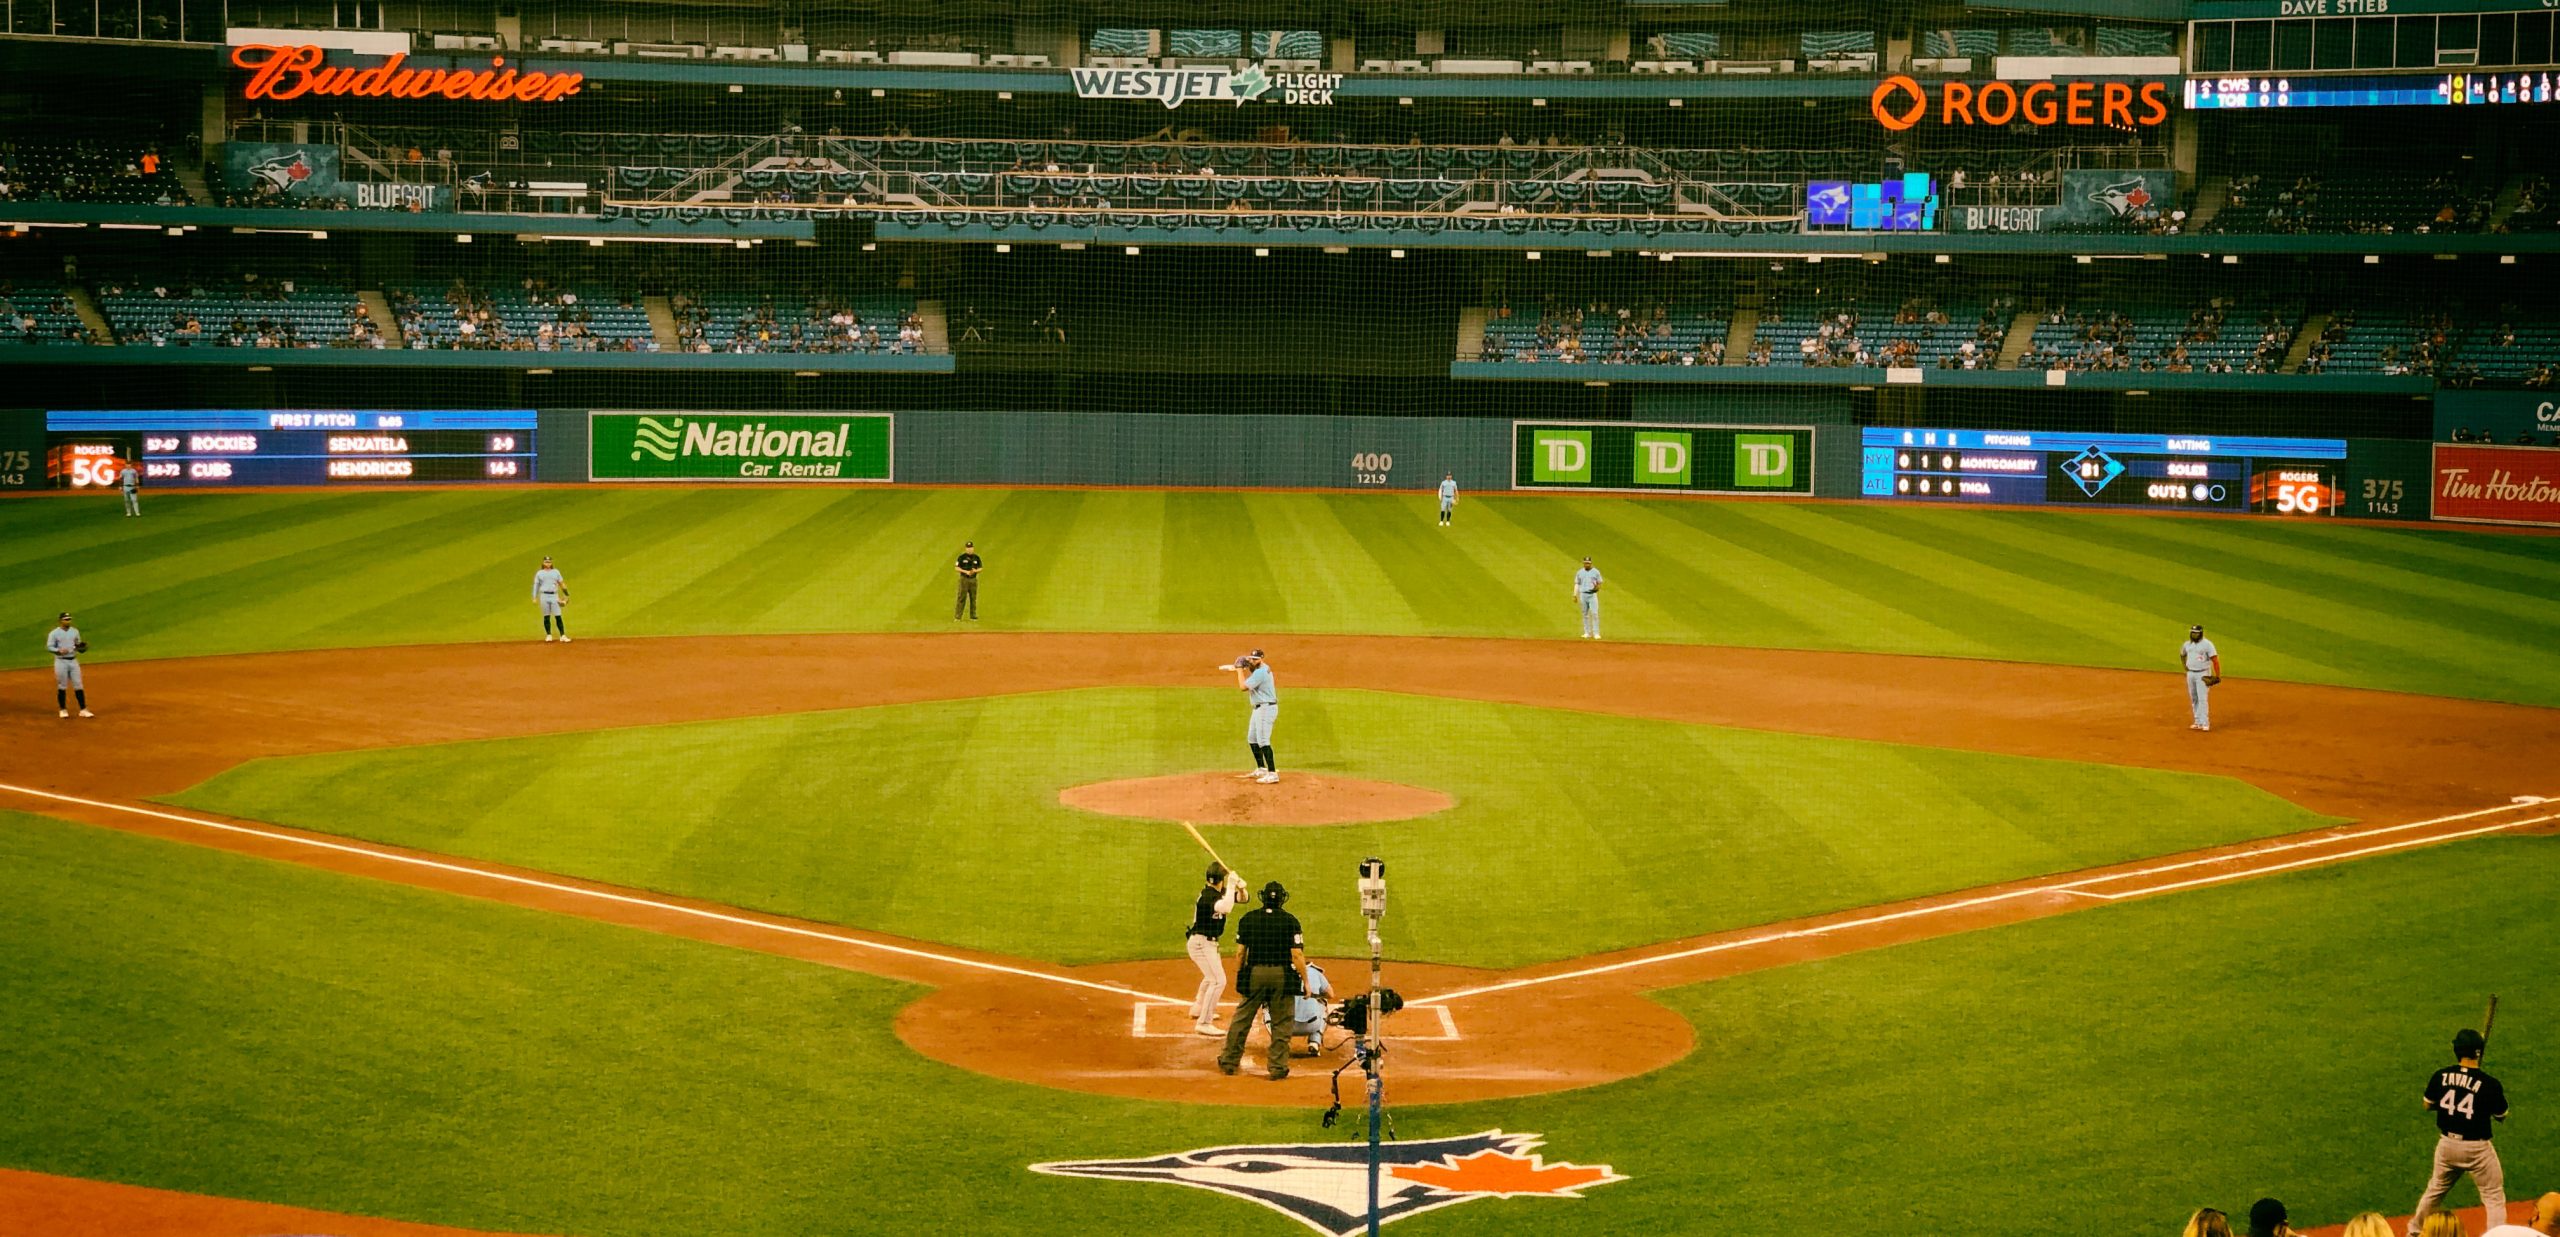 Alek Manoah pitching at the Rogers Centre